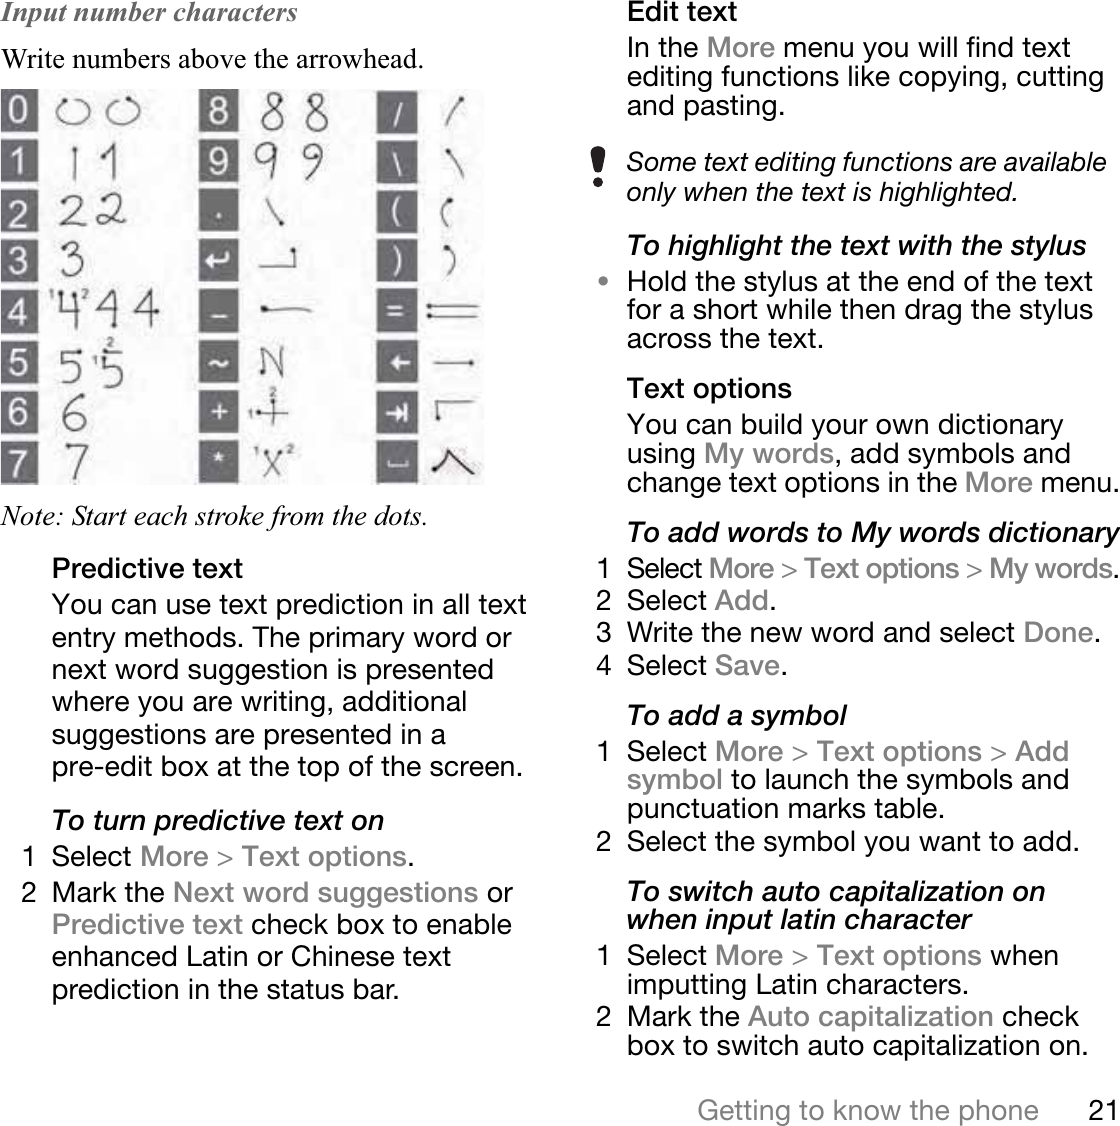 21Getting to know the phoneThis is the Internet version of the user&apos;s guide. © Print only for private use.Input number charactersWrite numbers above the arrowhead. Note: Start each stroke from the dots. Predictive textYou can use text prediction in all text entry methods. The primary word or next word suggestion is presented where you are writing, additional suggestions are presented in a pre-edit box at the top of the screen.To turn predictive text on1 Select More &gt;Text options.2 Mark the Next word suggestions or  Predictive text check box to enable enhanced Latin or Chinese text prediction in the status bar.Edit textIn the More menu you will find text editing functions like copying, cutting and pasting.To highlight the text with the stylus•Hold the stylus at the end of the text for a short while then drag the stylus across the text.Text optionsYou can build your own dictionary using My words, add symbols and change text options in the More menu.To add words to My words dictionary1 Select More &gt;Text options &gt;My words.2 Select Add.3 Write the new word and select Done.4 Select Save.To add a symbol1 Select More &gt;Text options &gt;Addsymbol to launch the symbols and punctuation marks table.2 Select the symbol you want to add.To switch auto capitalization on when input latin character1 Select More &gt;Text options whenimputting Latin characters.2 Mark the Auto capitalization check box to switch auto capitalization on.Some text editing functions are available only when the text is highlighted.